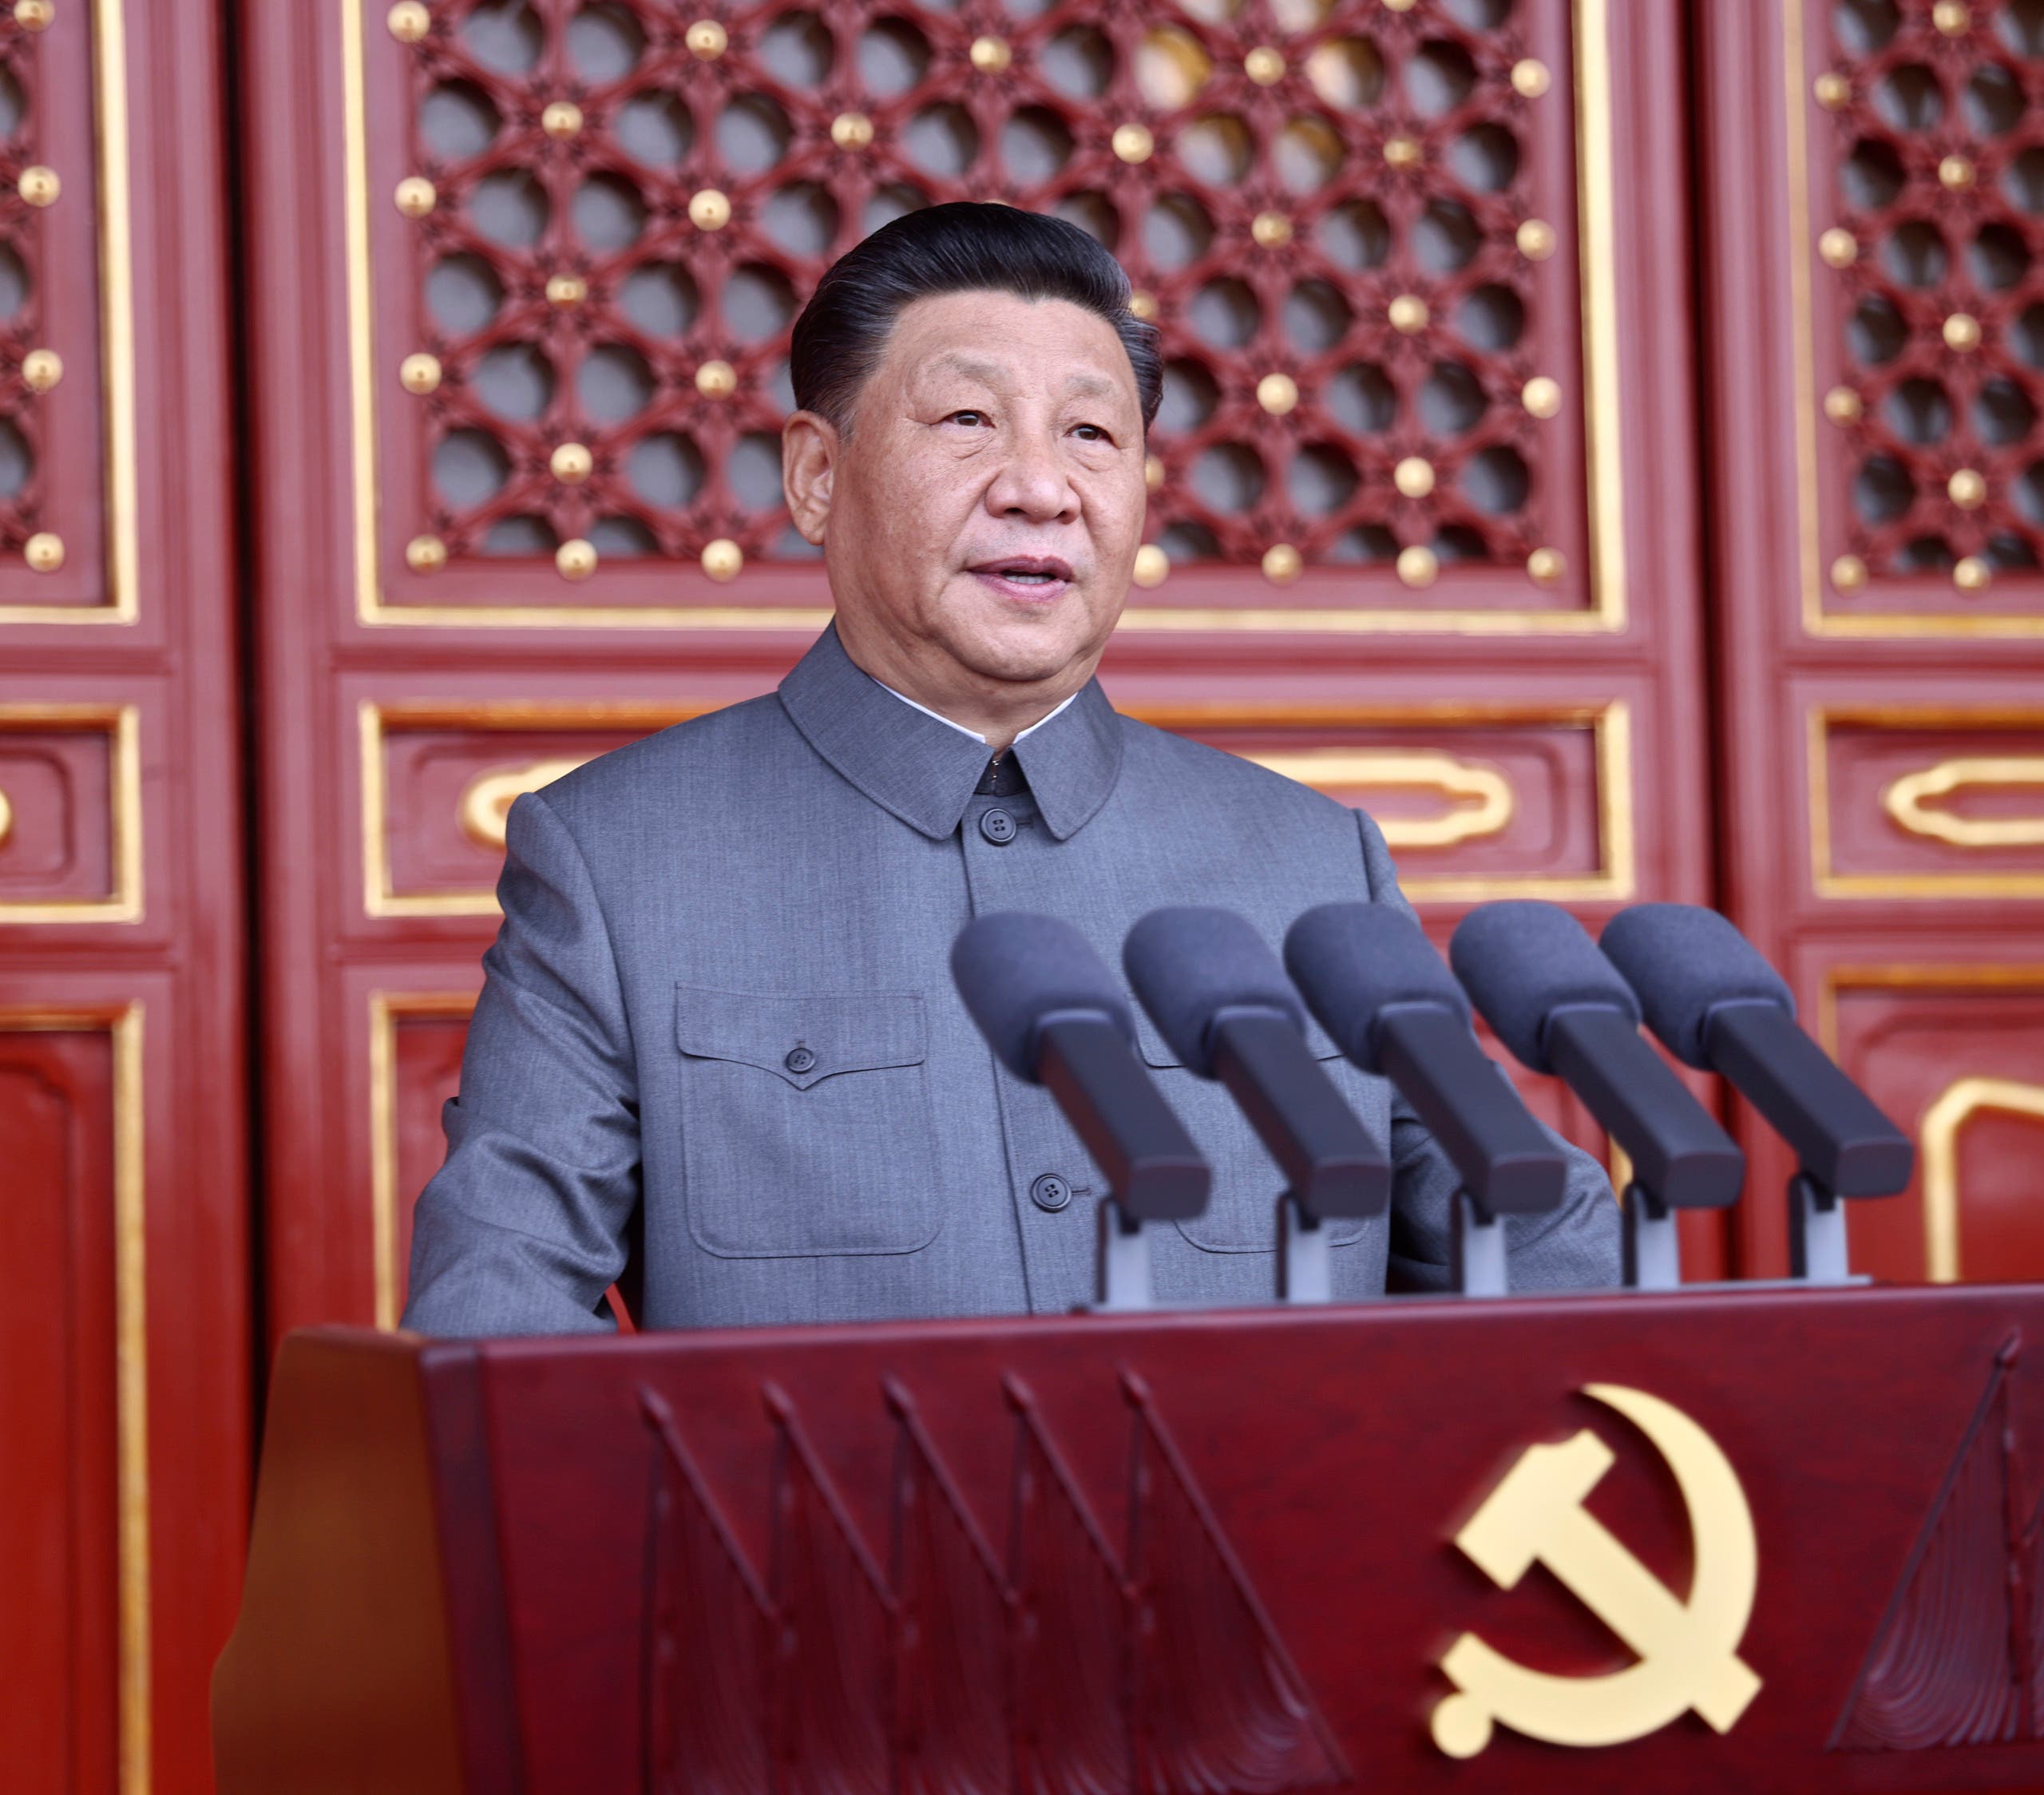  In this photo provided by China's Xinhua News Agency, Chinese President and party leader Xi Jinping delivers a speech at a ceremony marking the centenary of the ruling Communist Party in Beijing, China, Thursday, July 1, 2021. China's Communist Party is marking the 100th anniversary of its founding with speeches and grand displays intended to showcase economic progress and social stability to justify its iron grip on political power that it shows no intention of relaxing. (Ju Peng/Xinhua via AP)